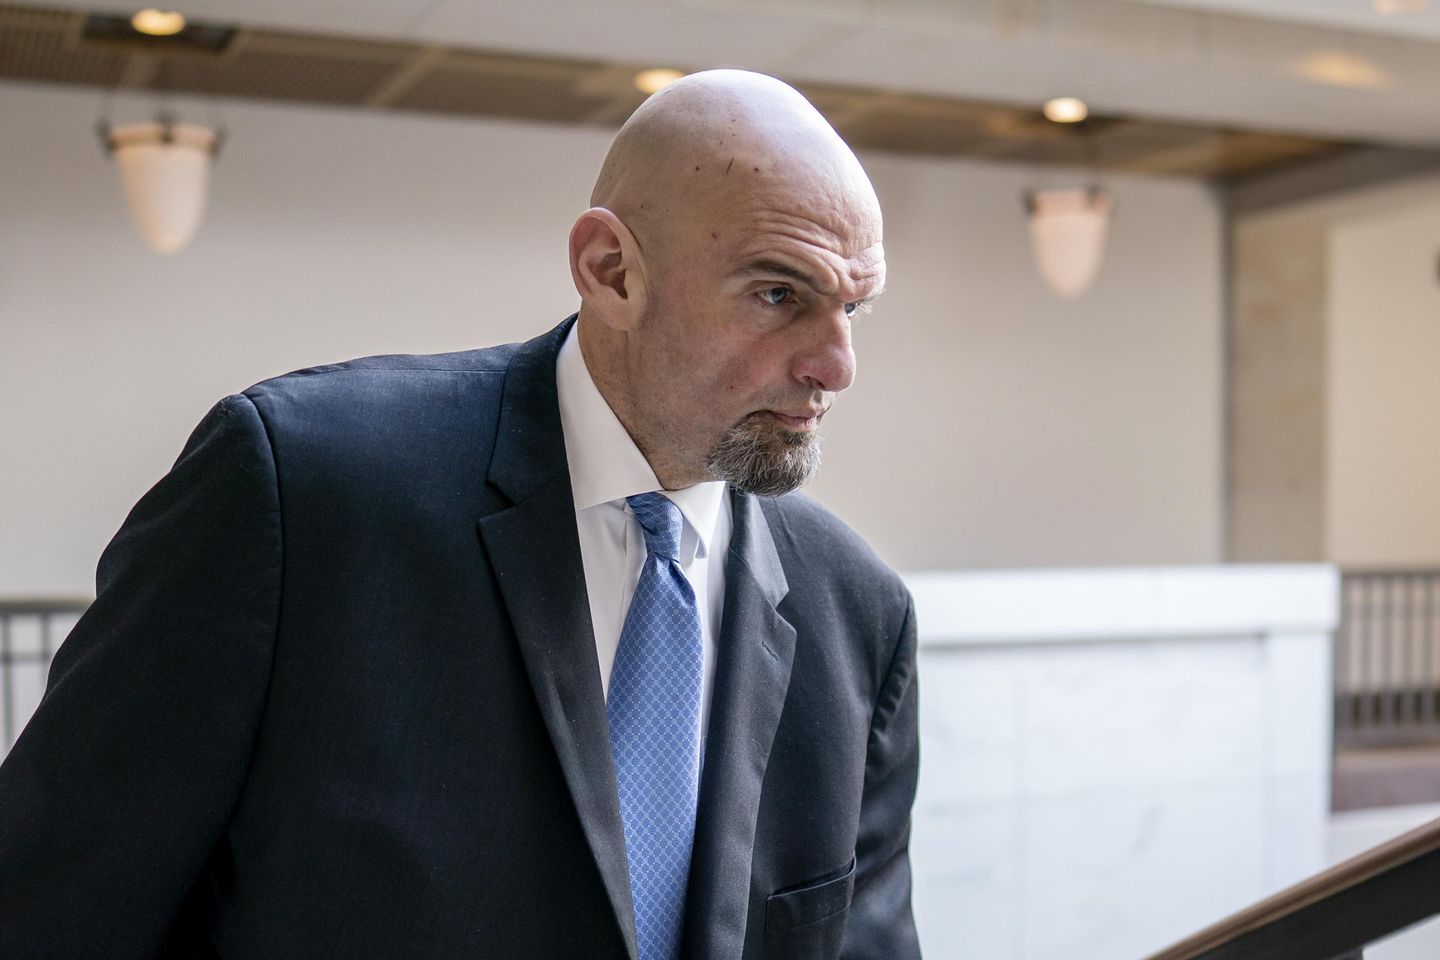 Sen. John Fetterman discharged from Walter Reed after treatment for depression